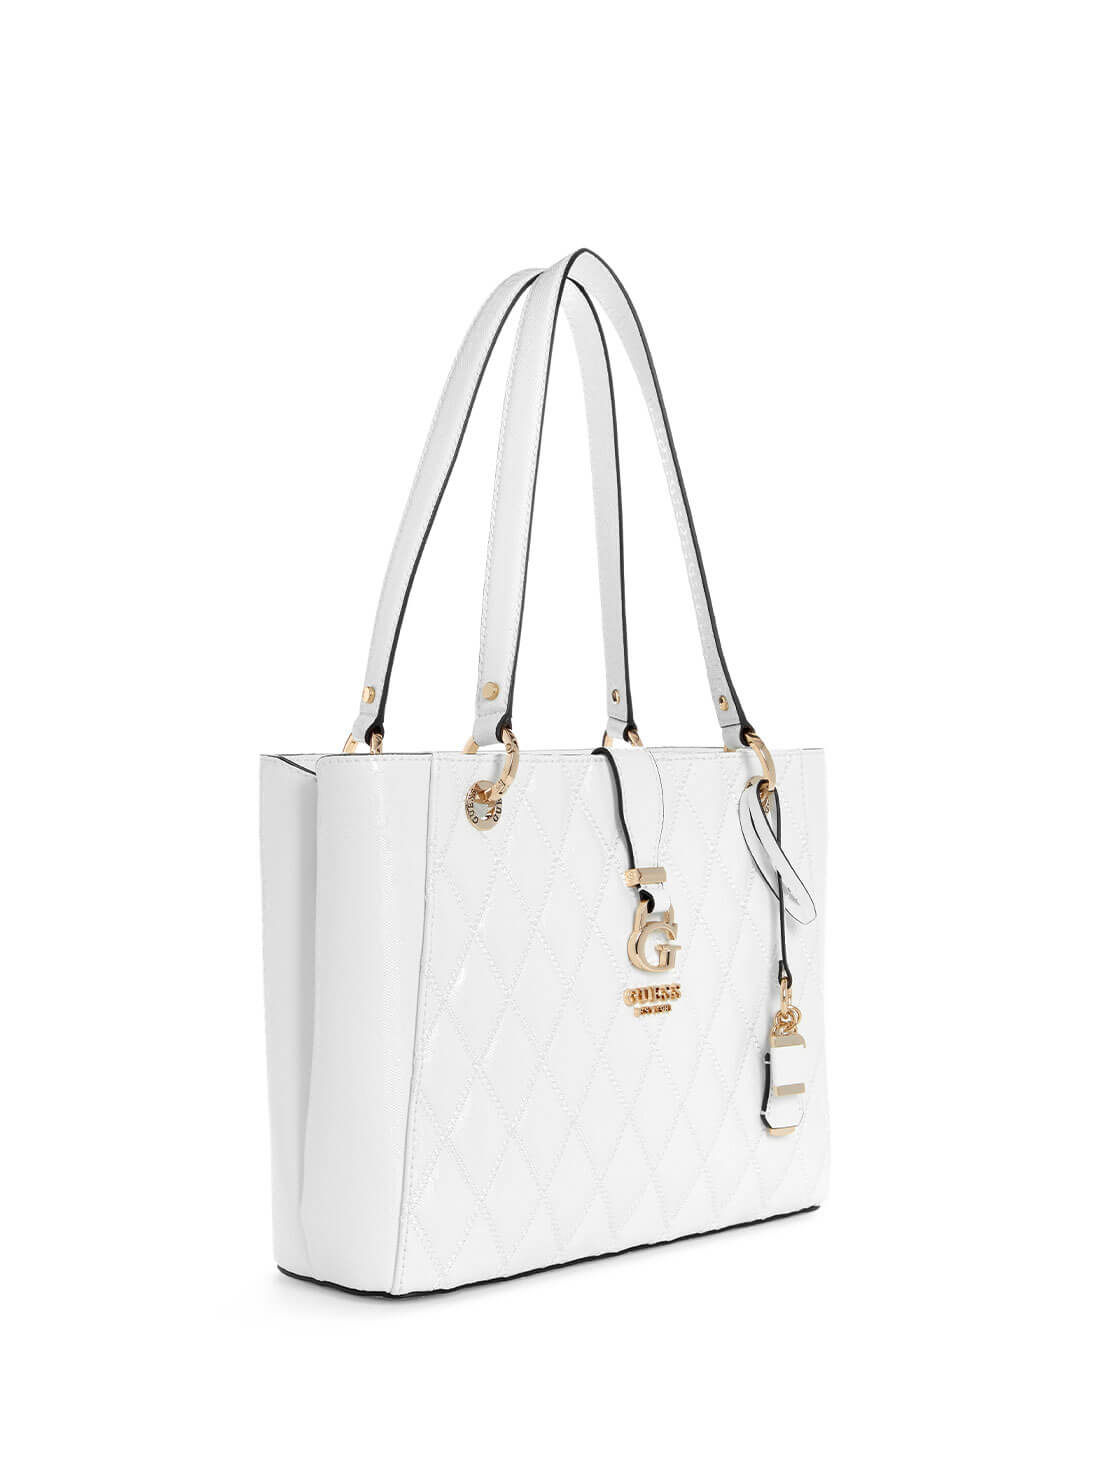 GUESS White Adi Small Tote Bag side view